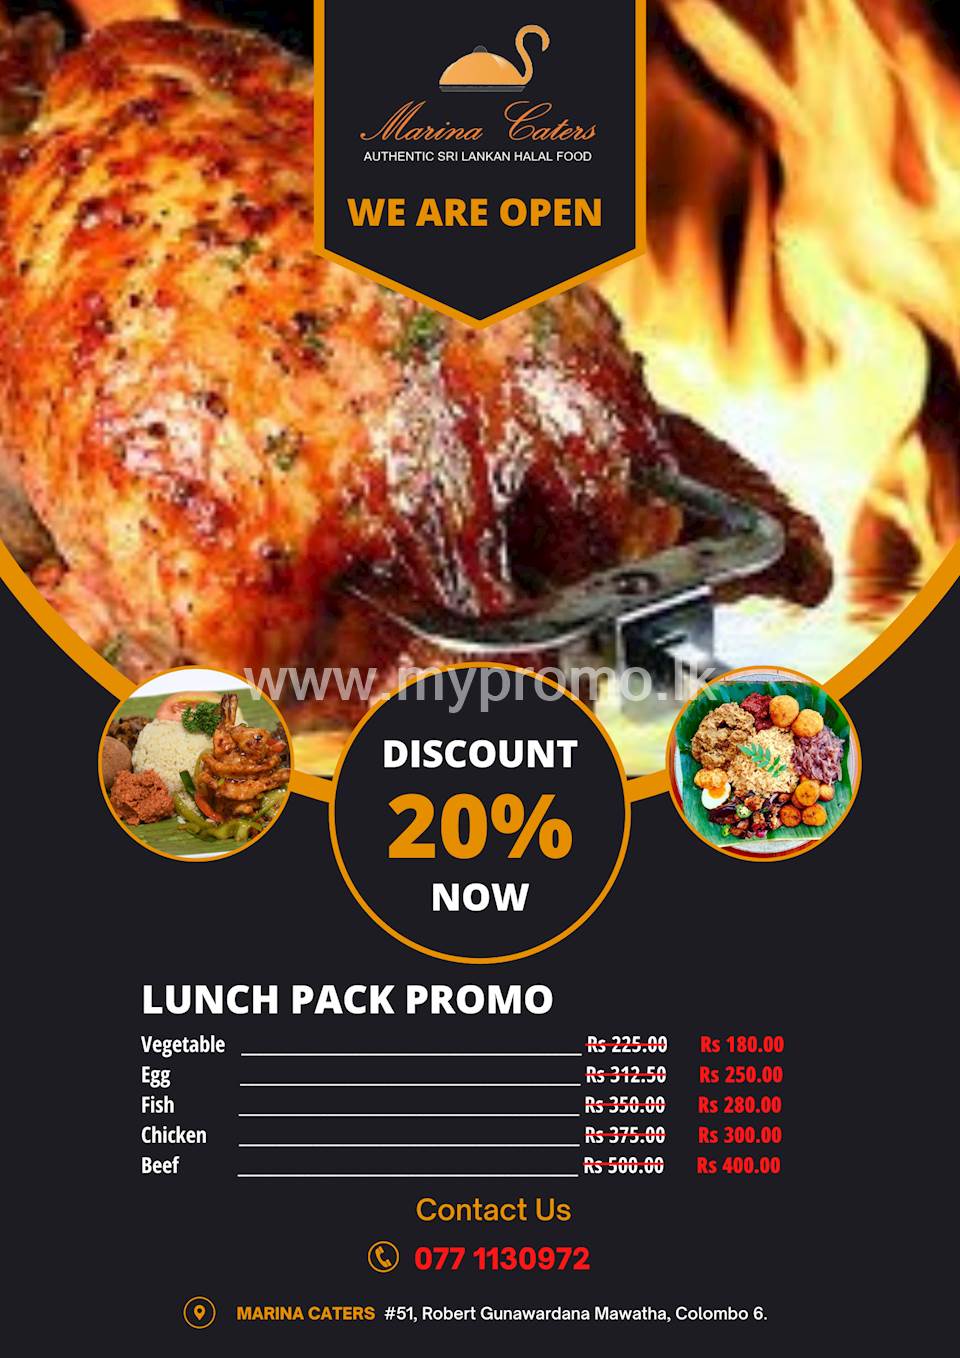 Lunch Pack Promo